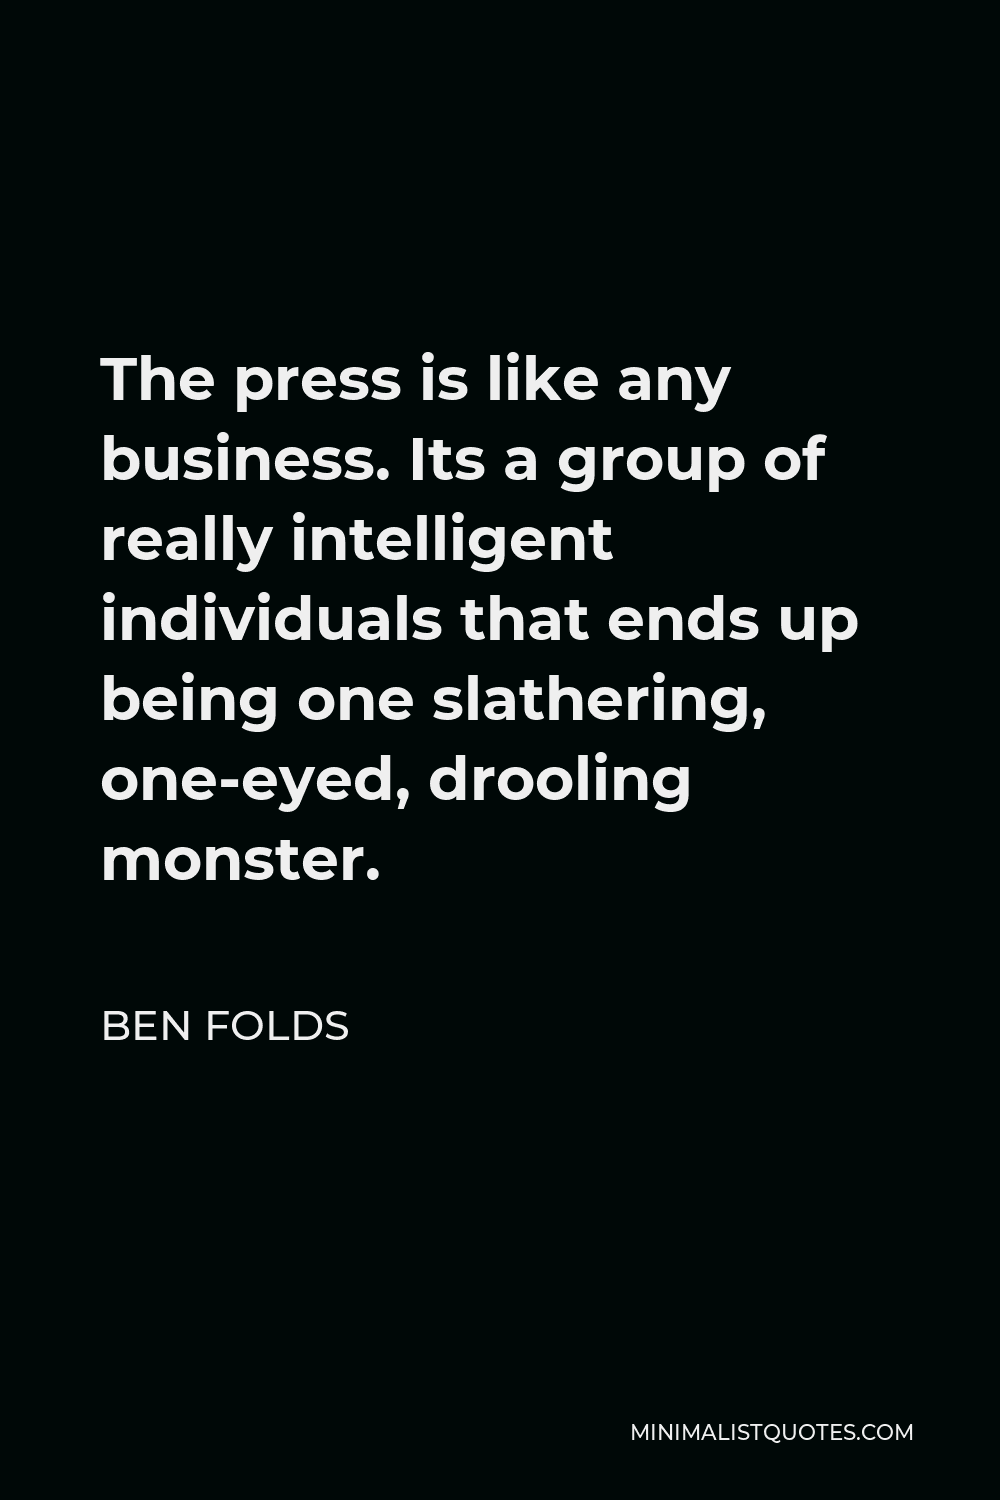 Ben Folds Quote - The press is like any business. Its a group of really intelligent individuals that ends up being one slathering, one-eyed, drooling monster.